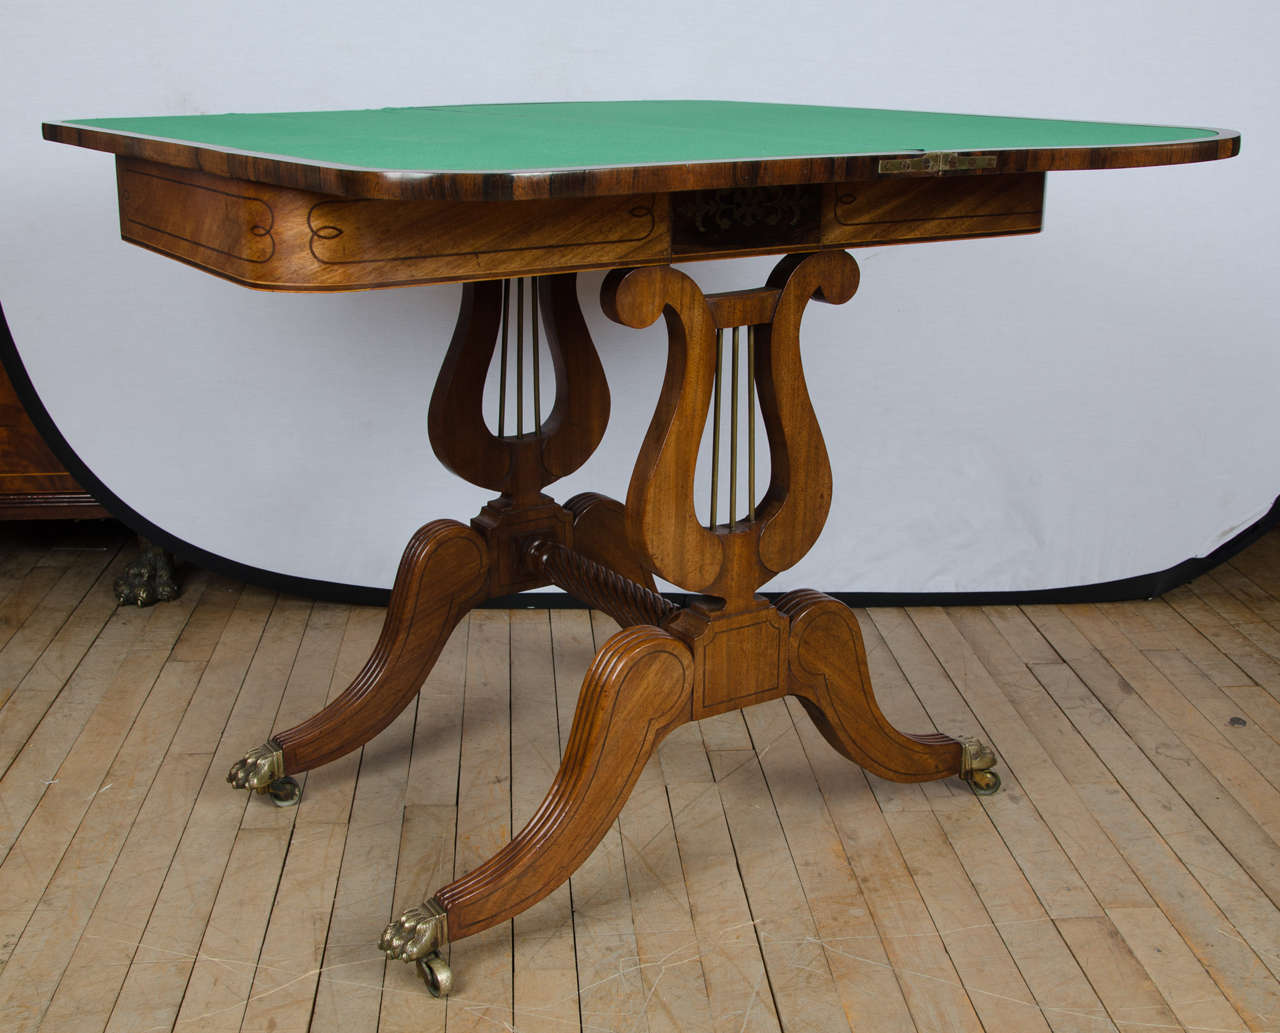 A superb quality Regency mahogany card table supported by 2 lyre sides and joined by a turned, twisted stretcher base ending on hairy paw brass castor feet. The table features a rosewood panel in the center of the frieze with a detailed brass inlay